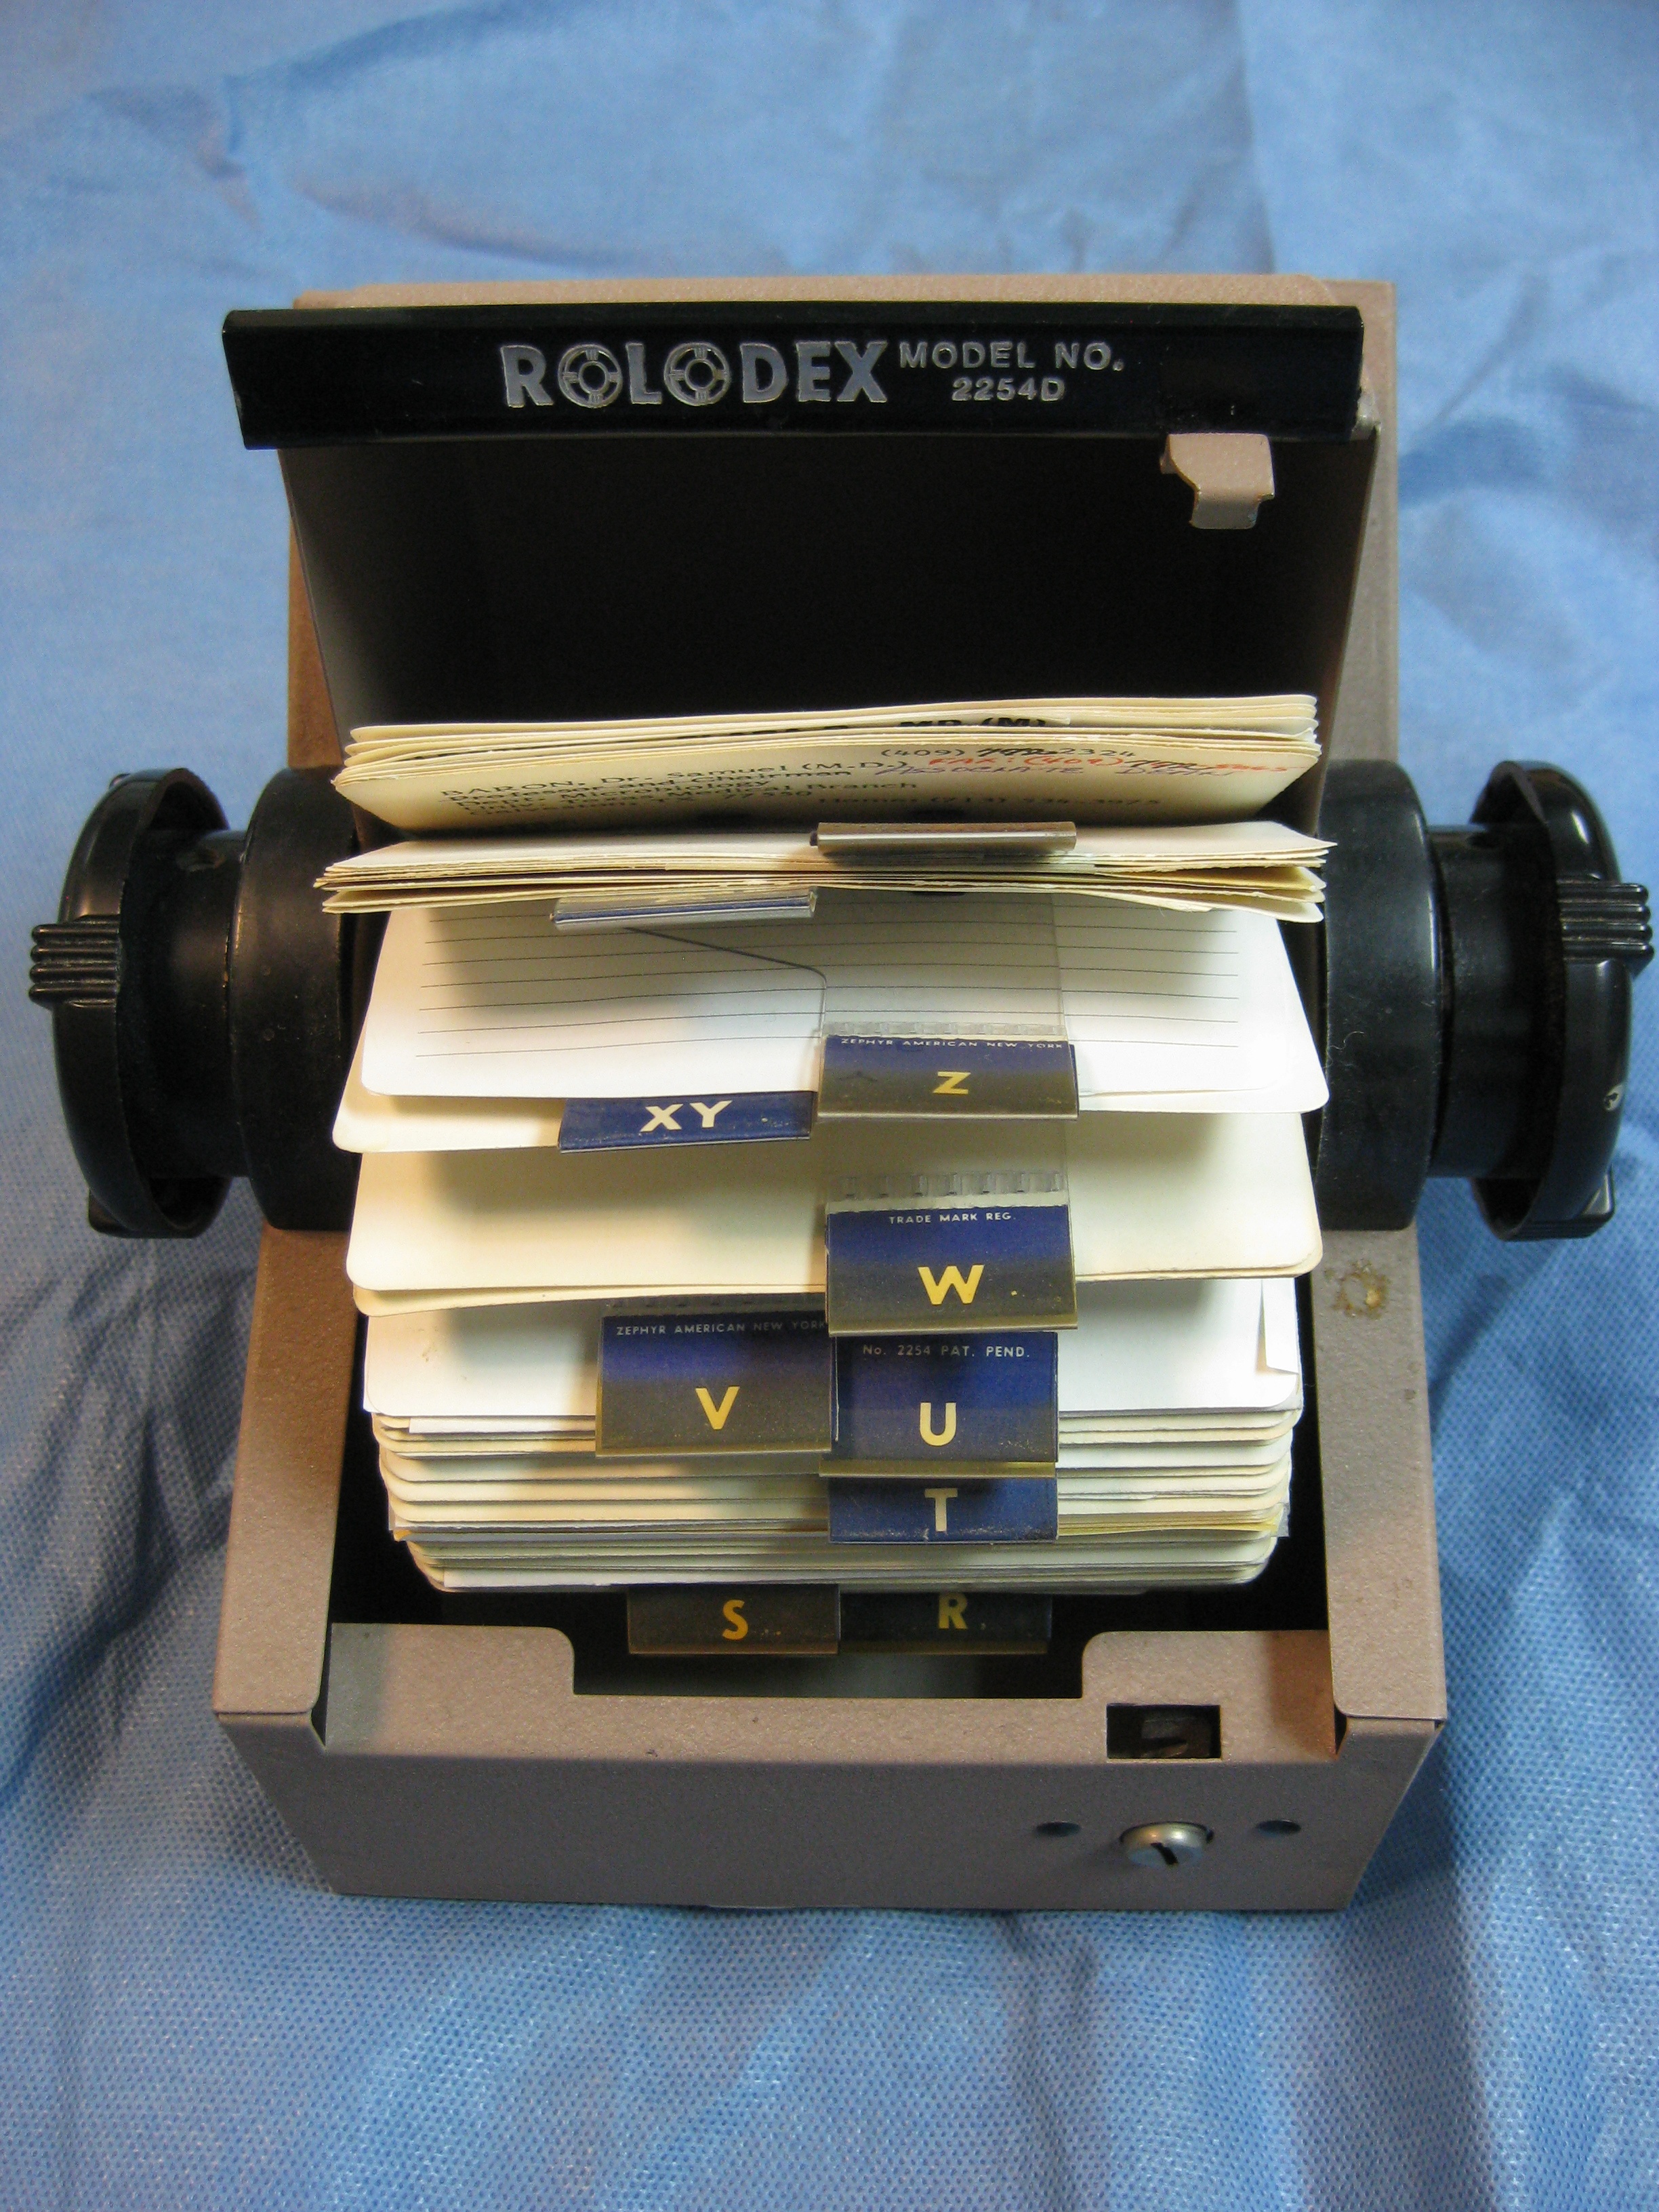 Rolodex jammed with business cards